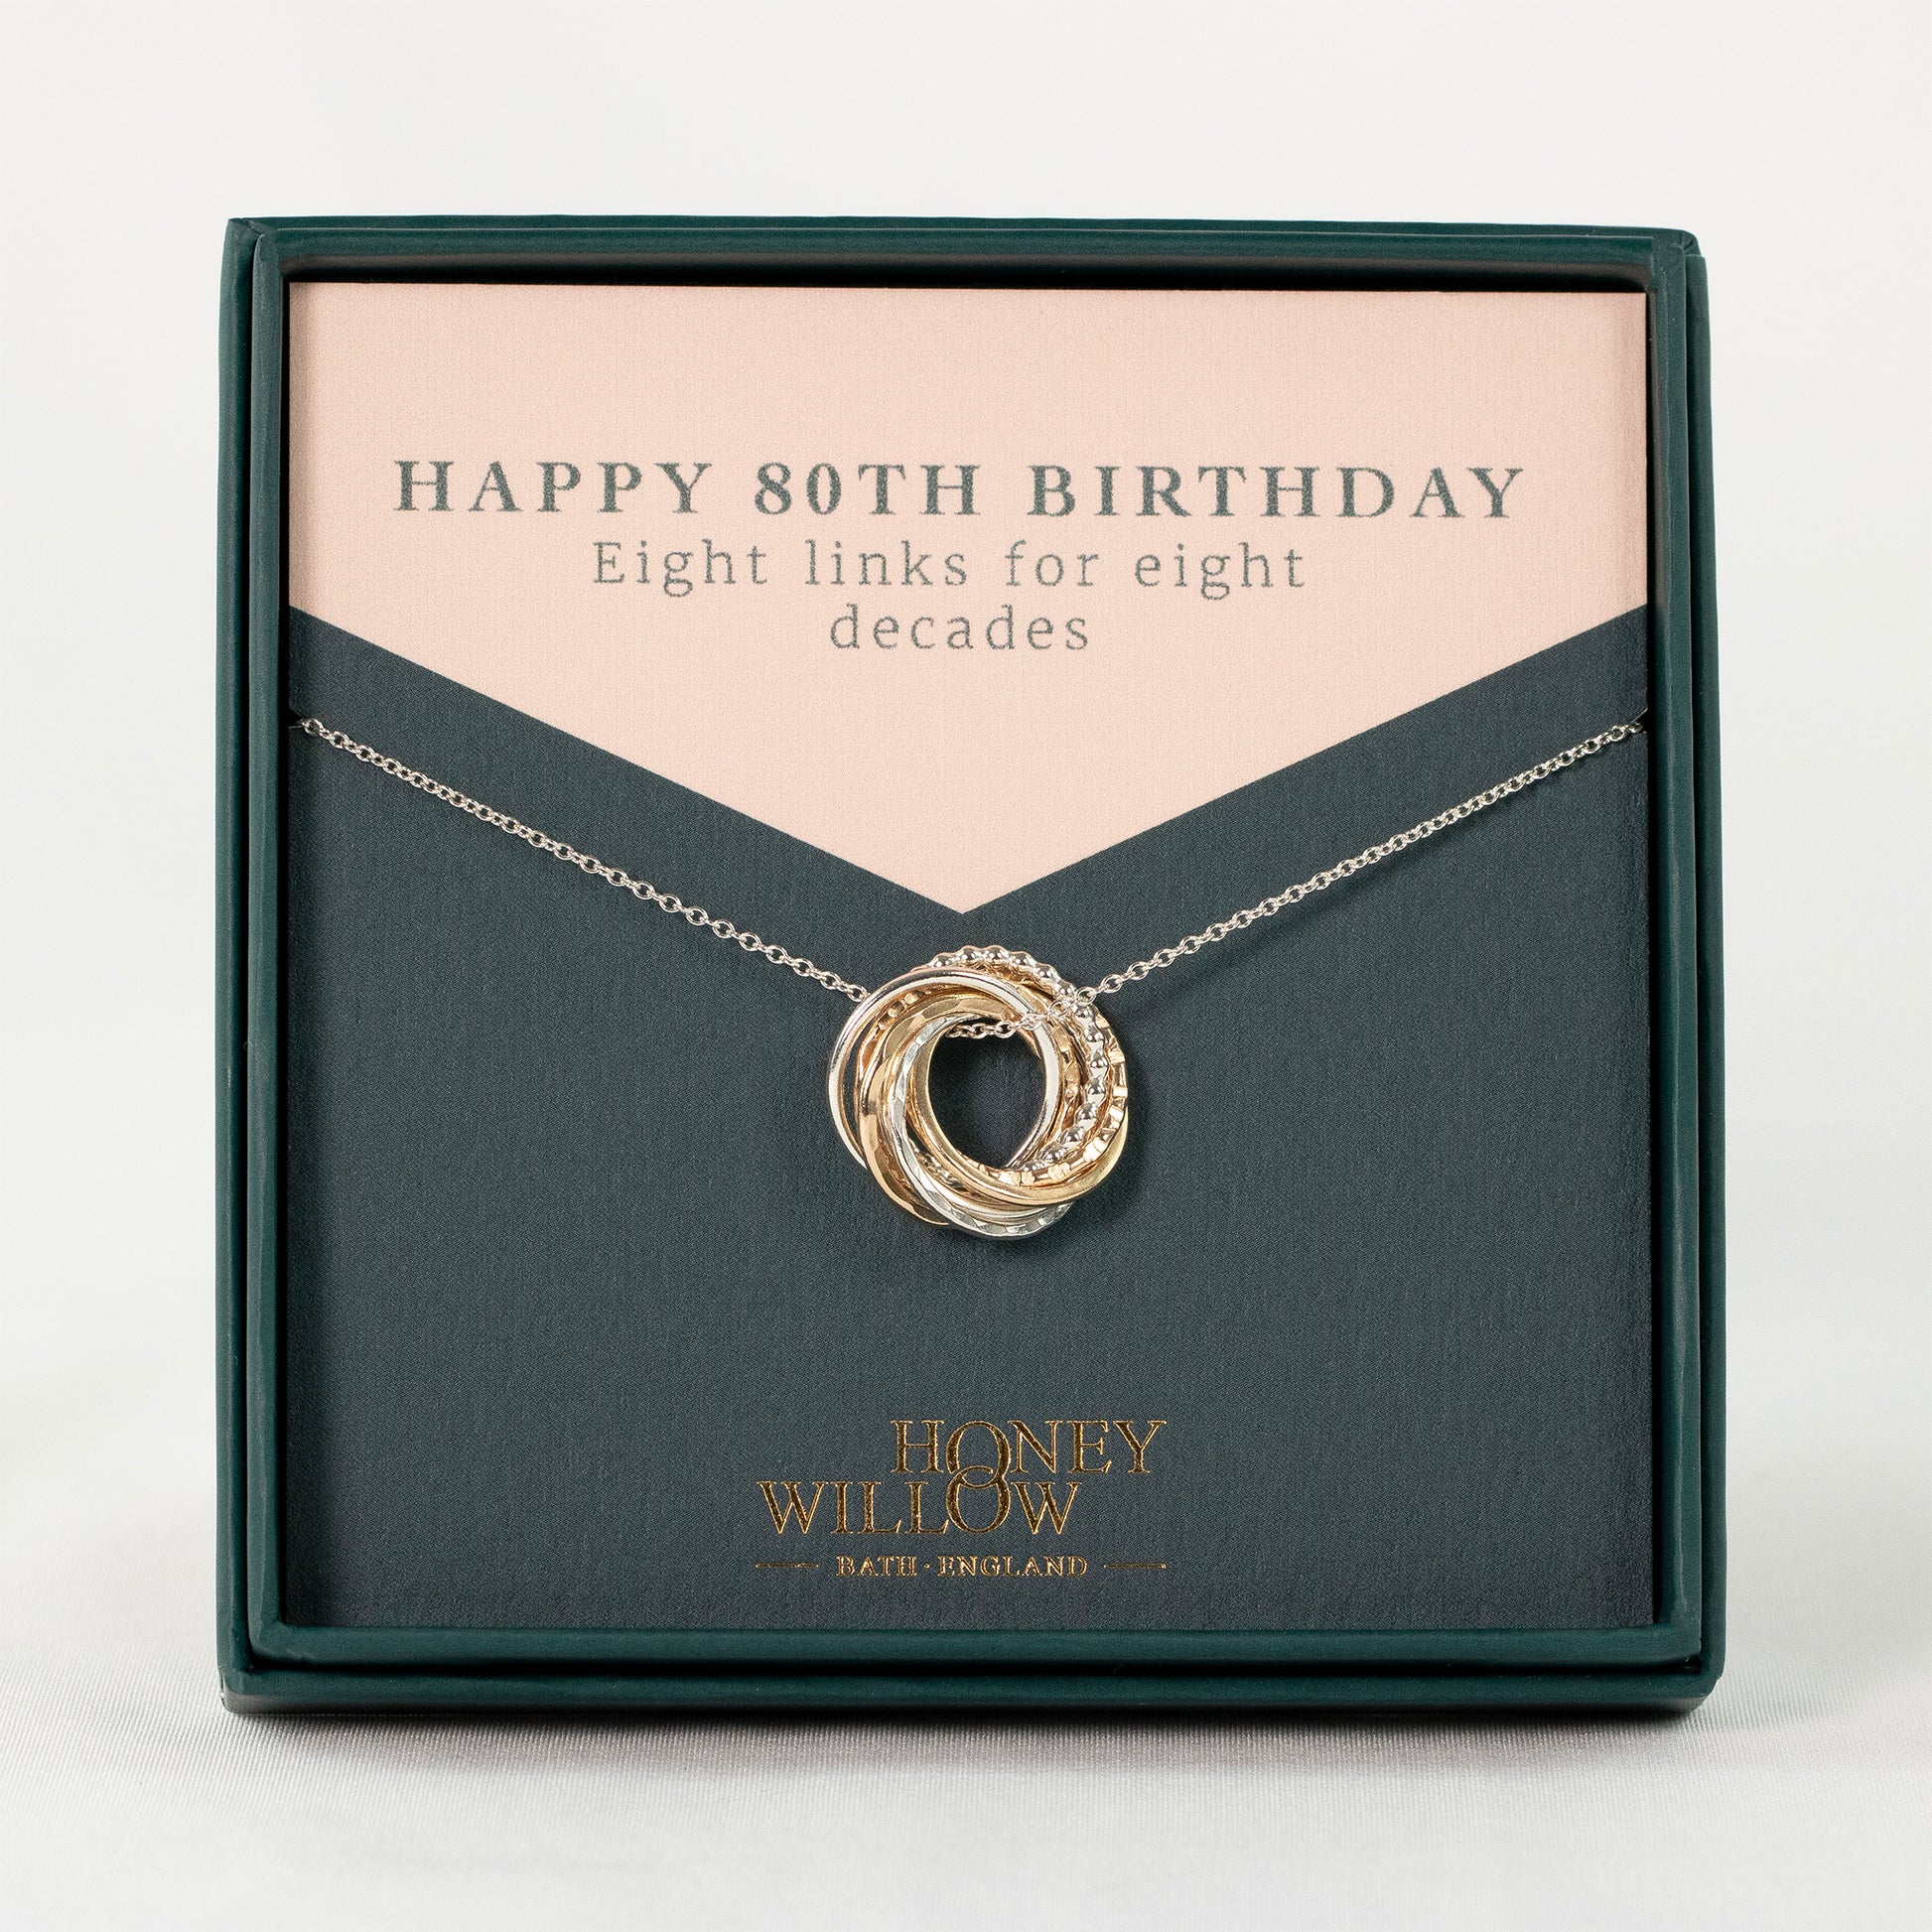 80th Birthday Necklace - The Original 8 Links for 8 Decades Necklace - Petite Silver & Gold